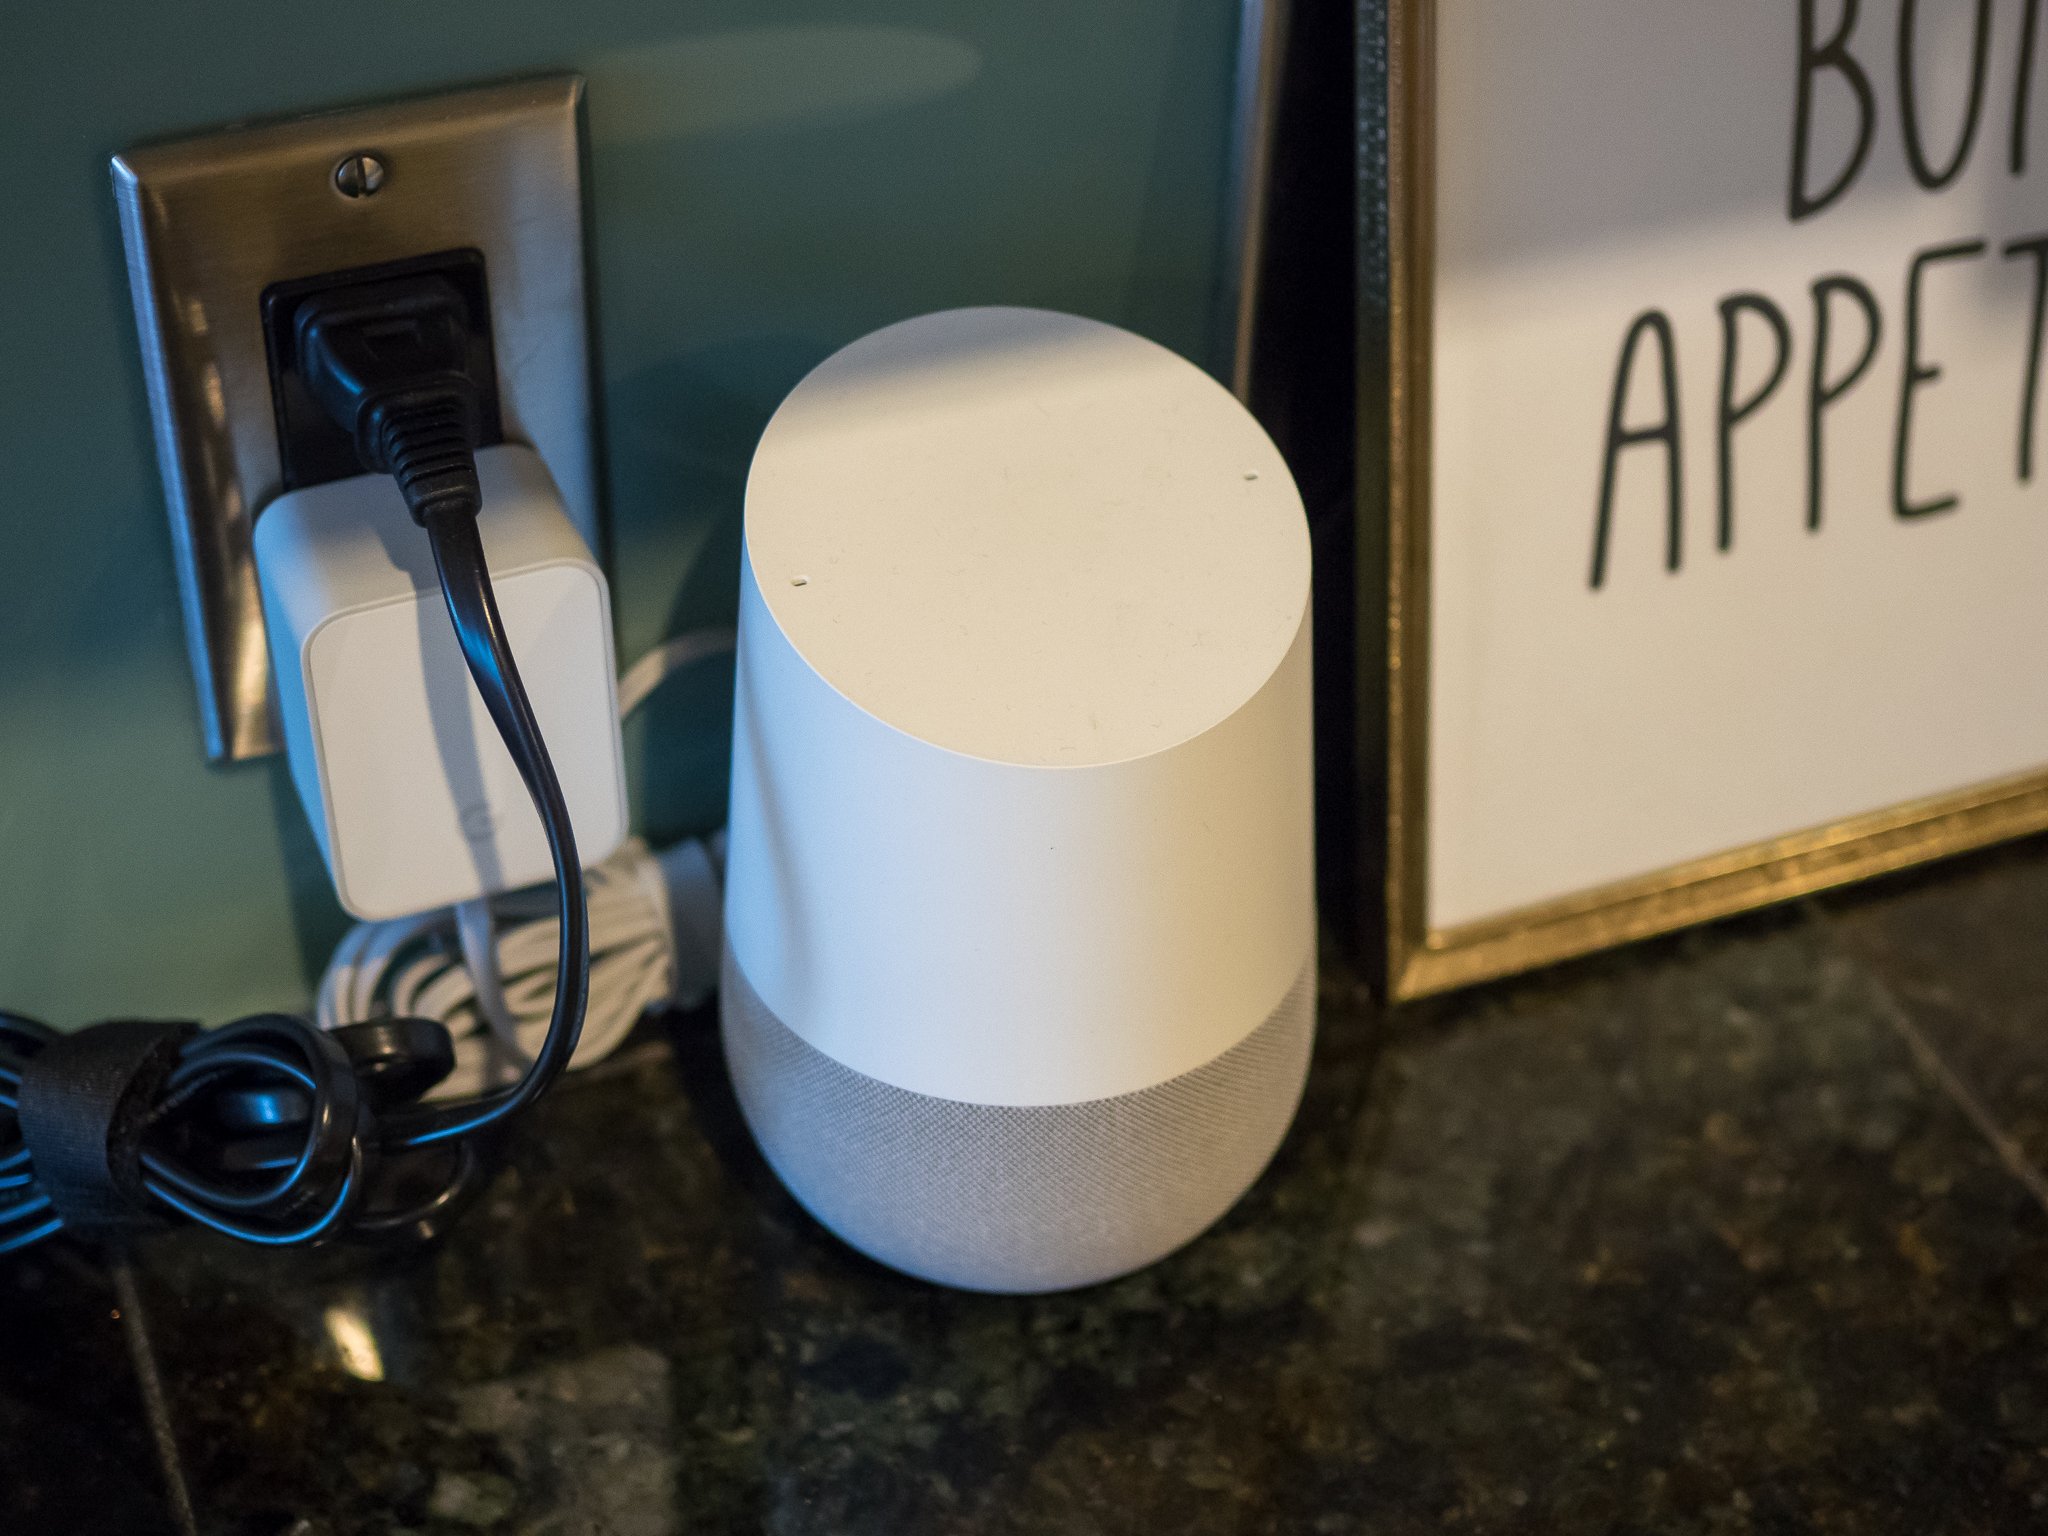 How To Set Up Guest Mode On Google Home